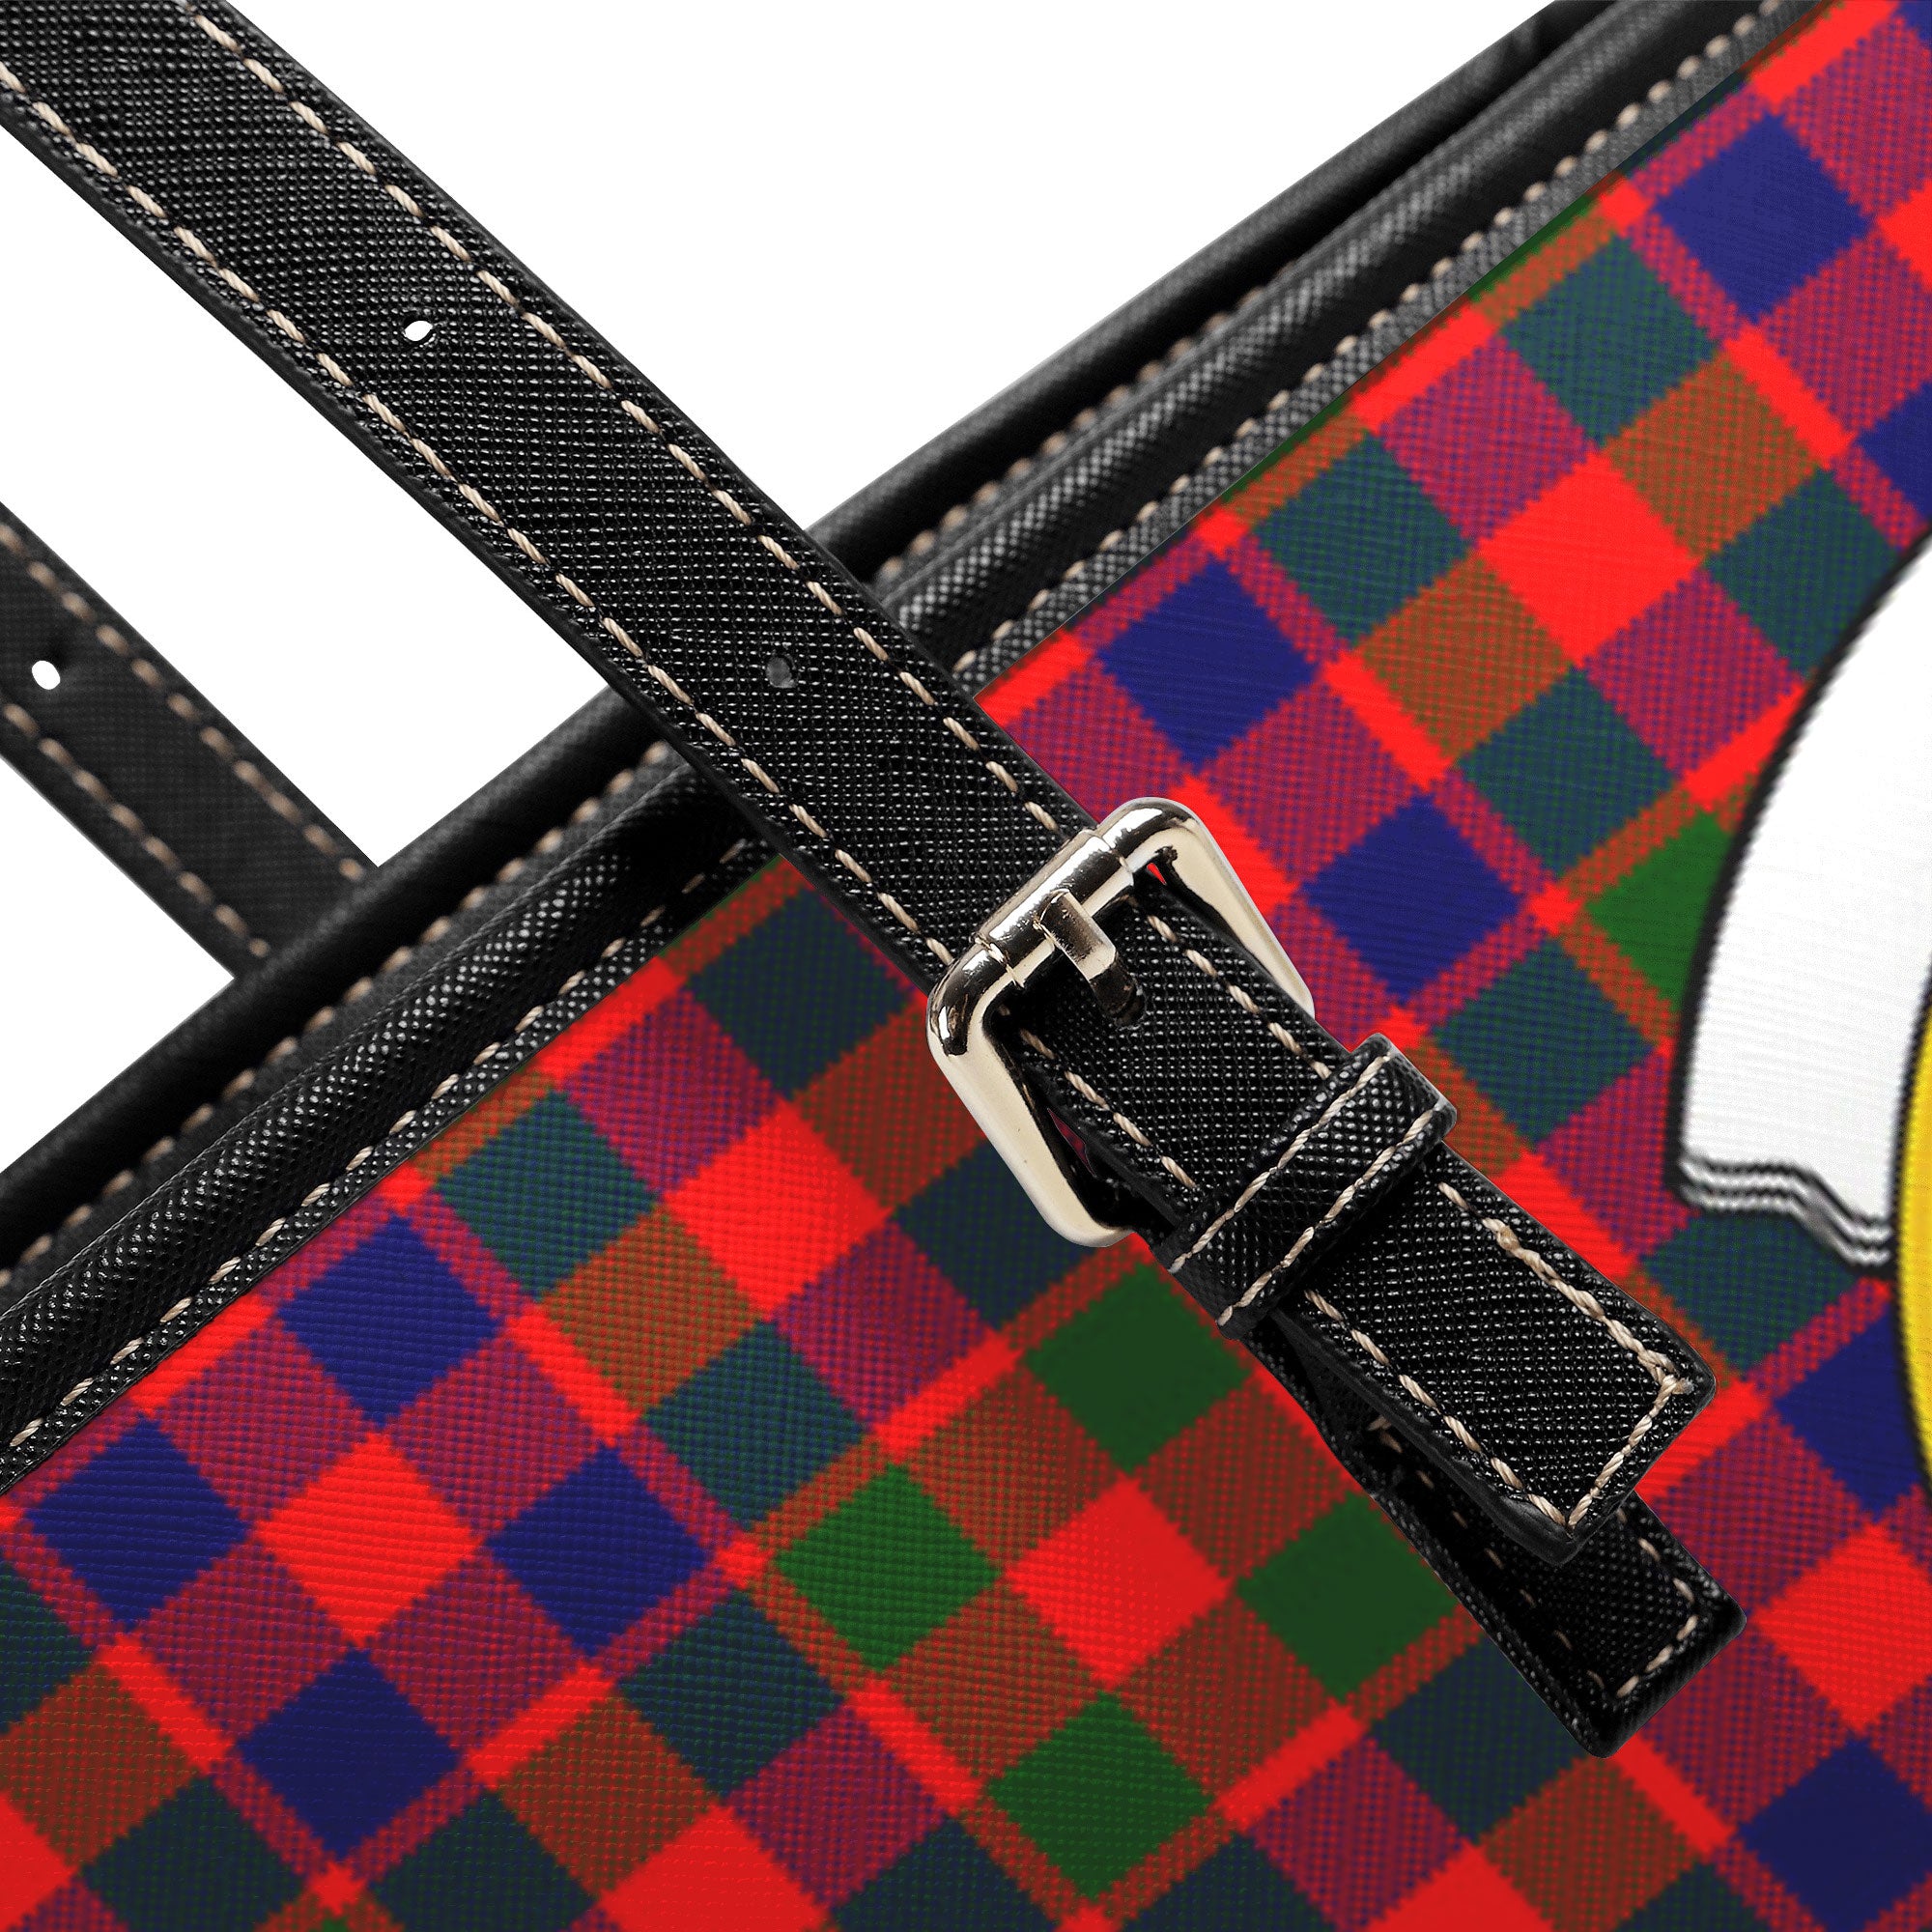 Gow (or McGouan) Tartan Crest Leather Tote Bag